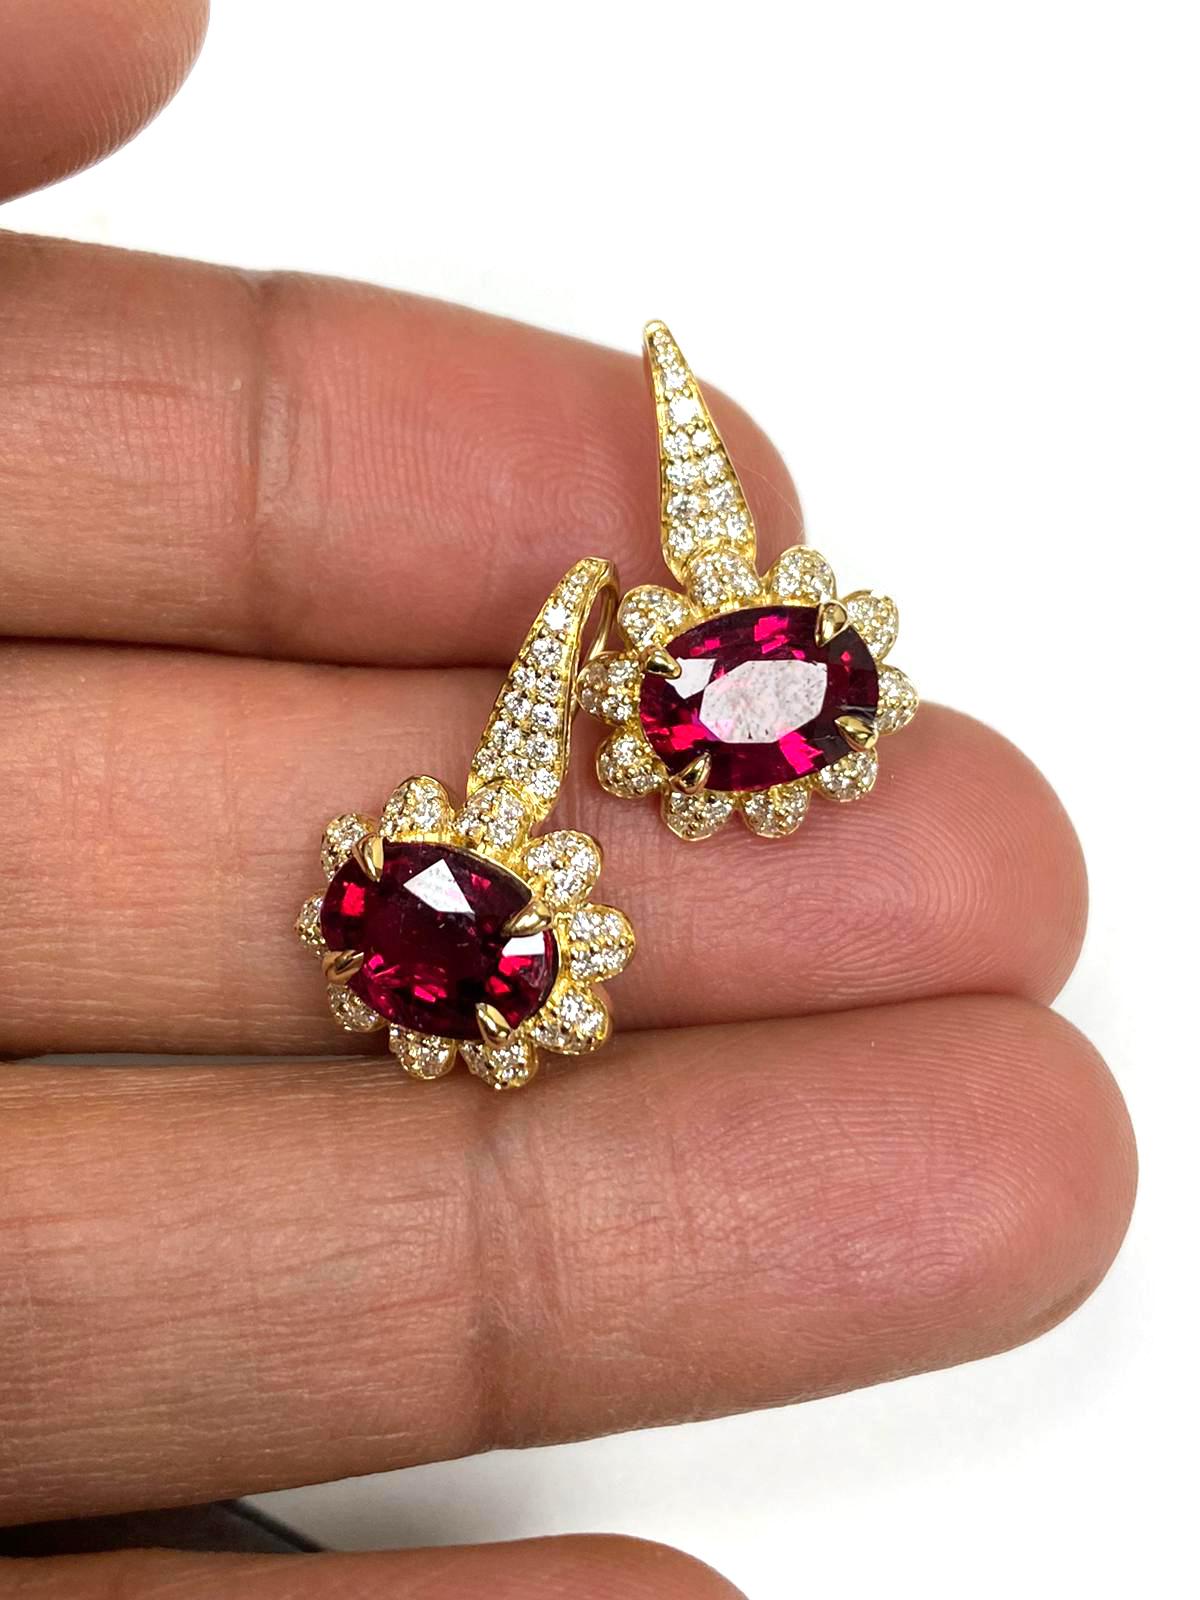 Faceted Oval Rubellite Earrings with Diamonds And Lever Back in 18K Yellow Gold, from 'G-One' Collection

Stone Size: 9.2 x 6.8 mm

Approx. Stone Wt: 3.36 Carats (Rubellite)

Diamonds: G-H / VS, Approx. Wt: 0.60 Carats
